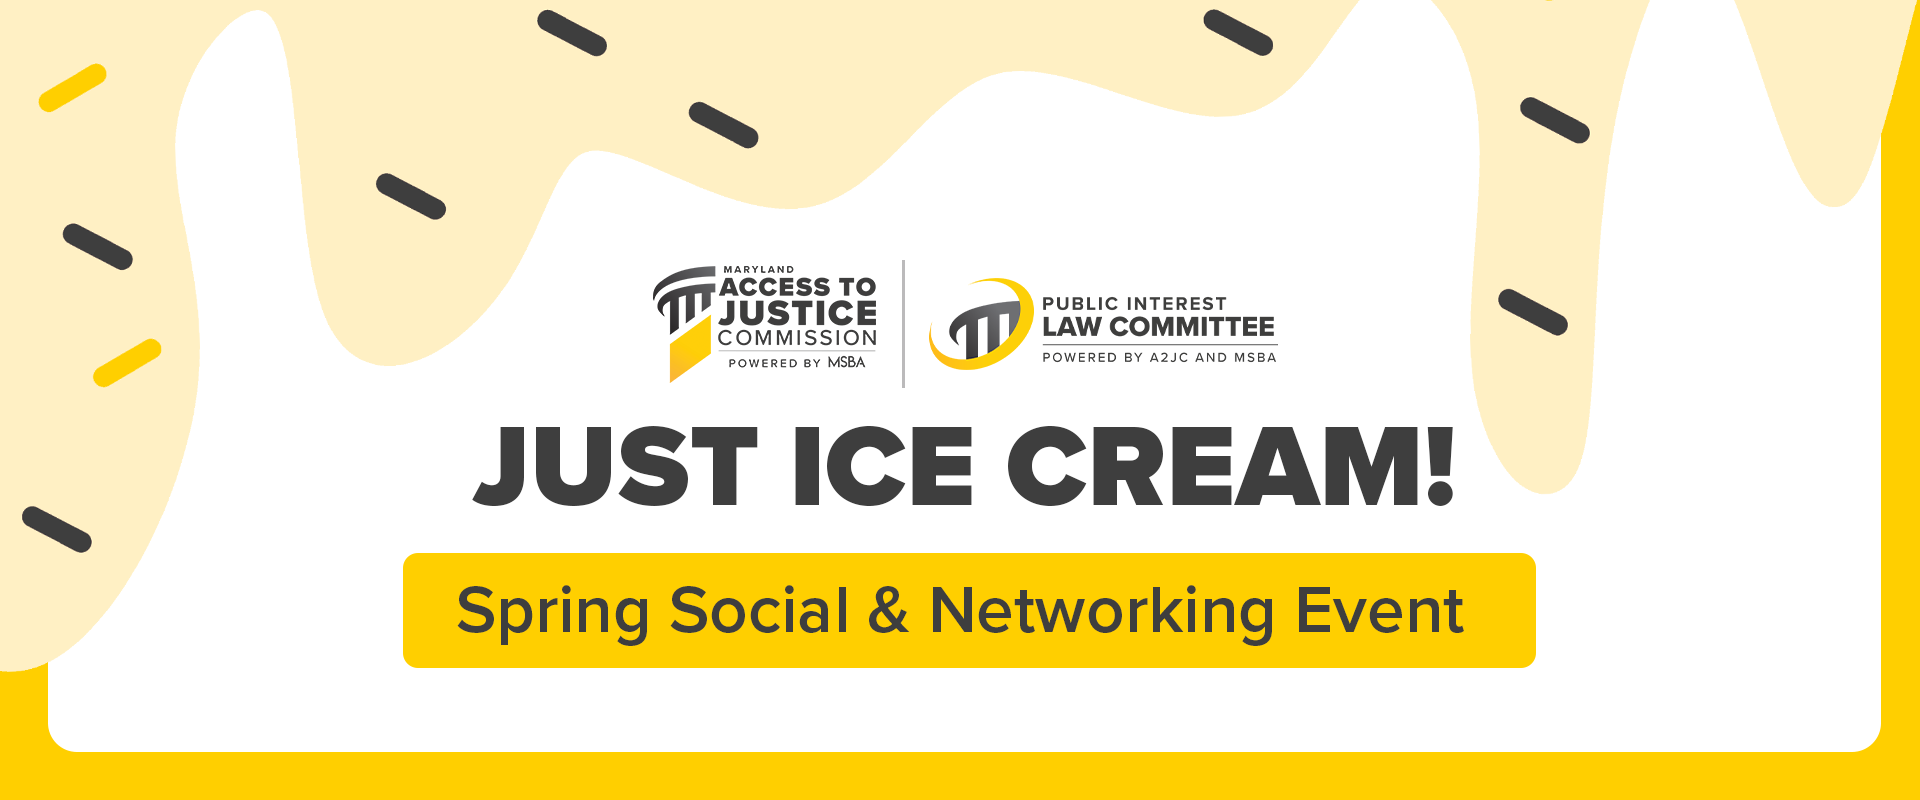 Just ice cream social networking event